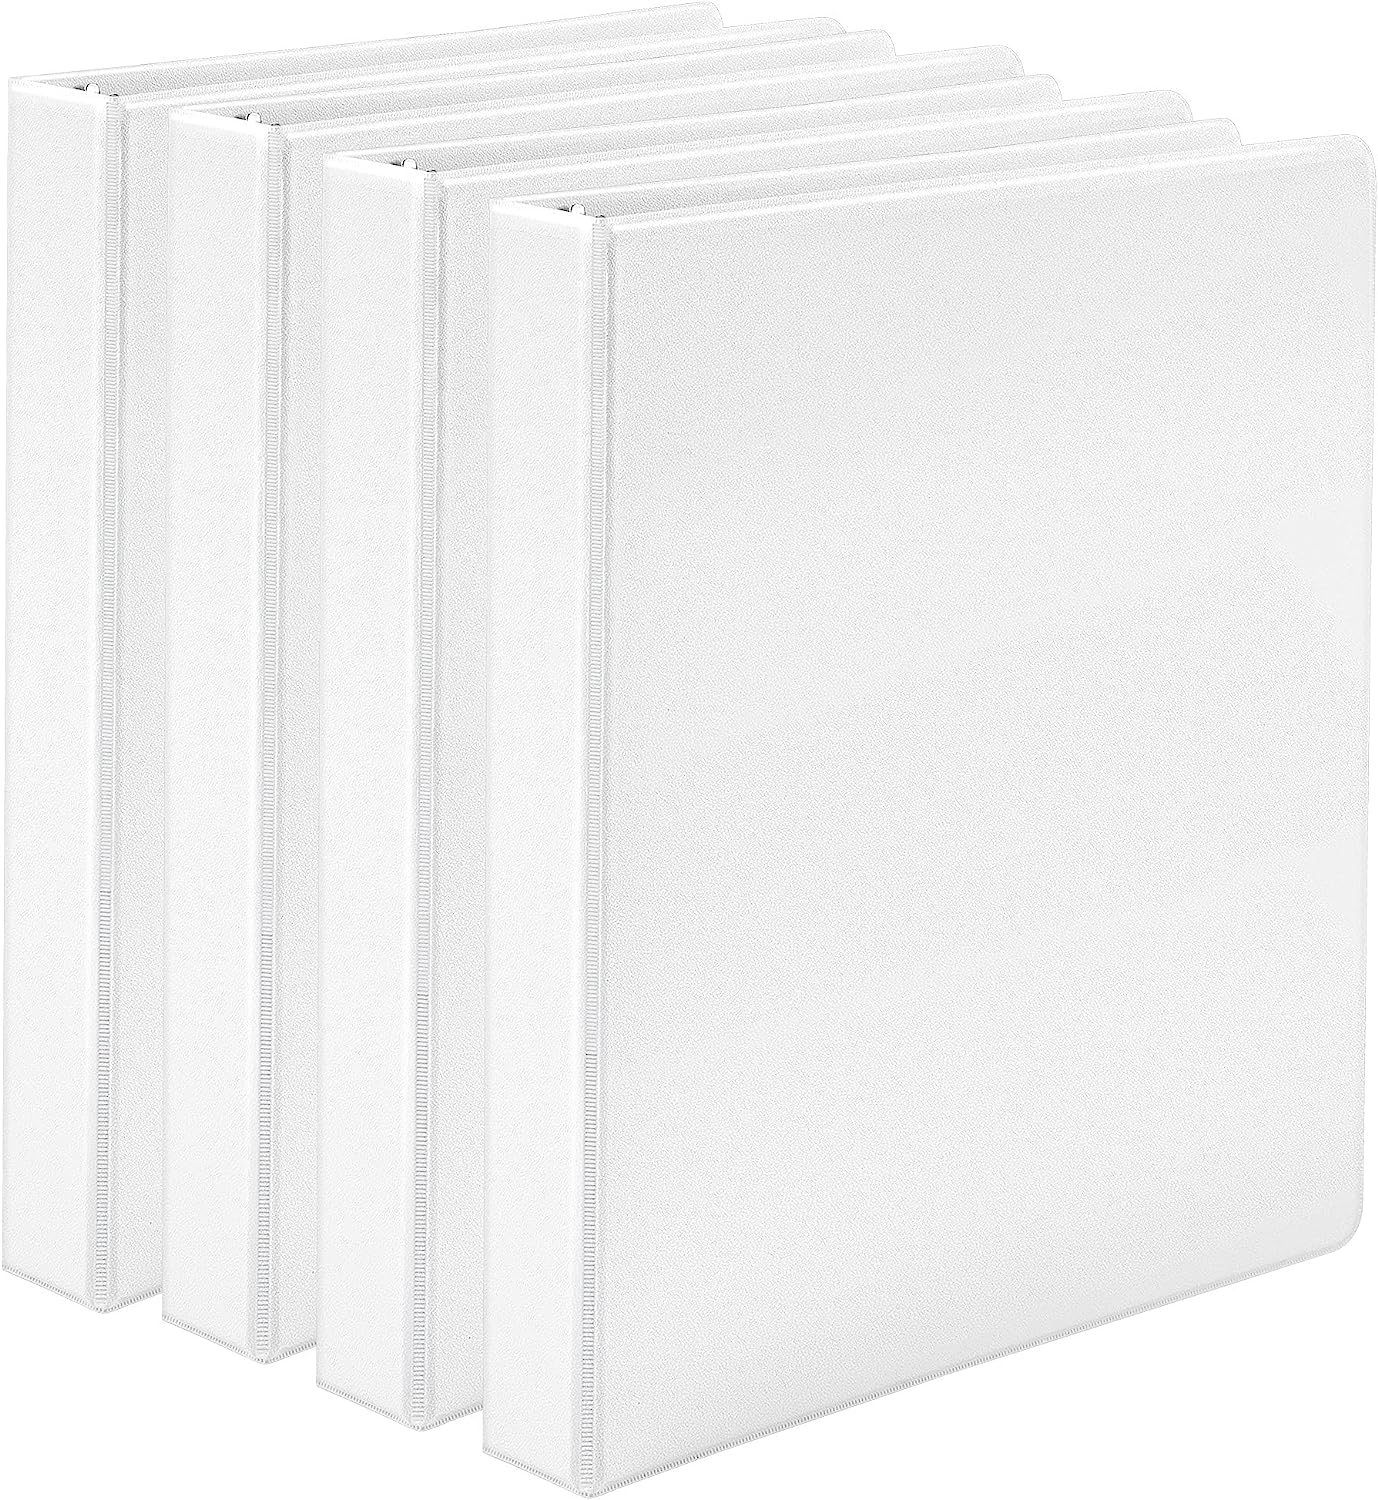 Amazon Basics 3 Ring Binder with 1 Inch D-Ring and [...]